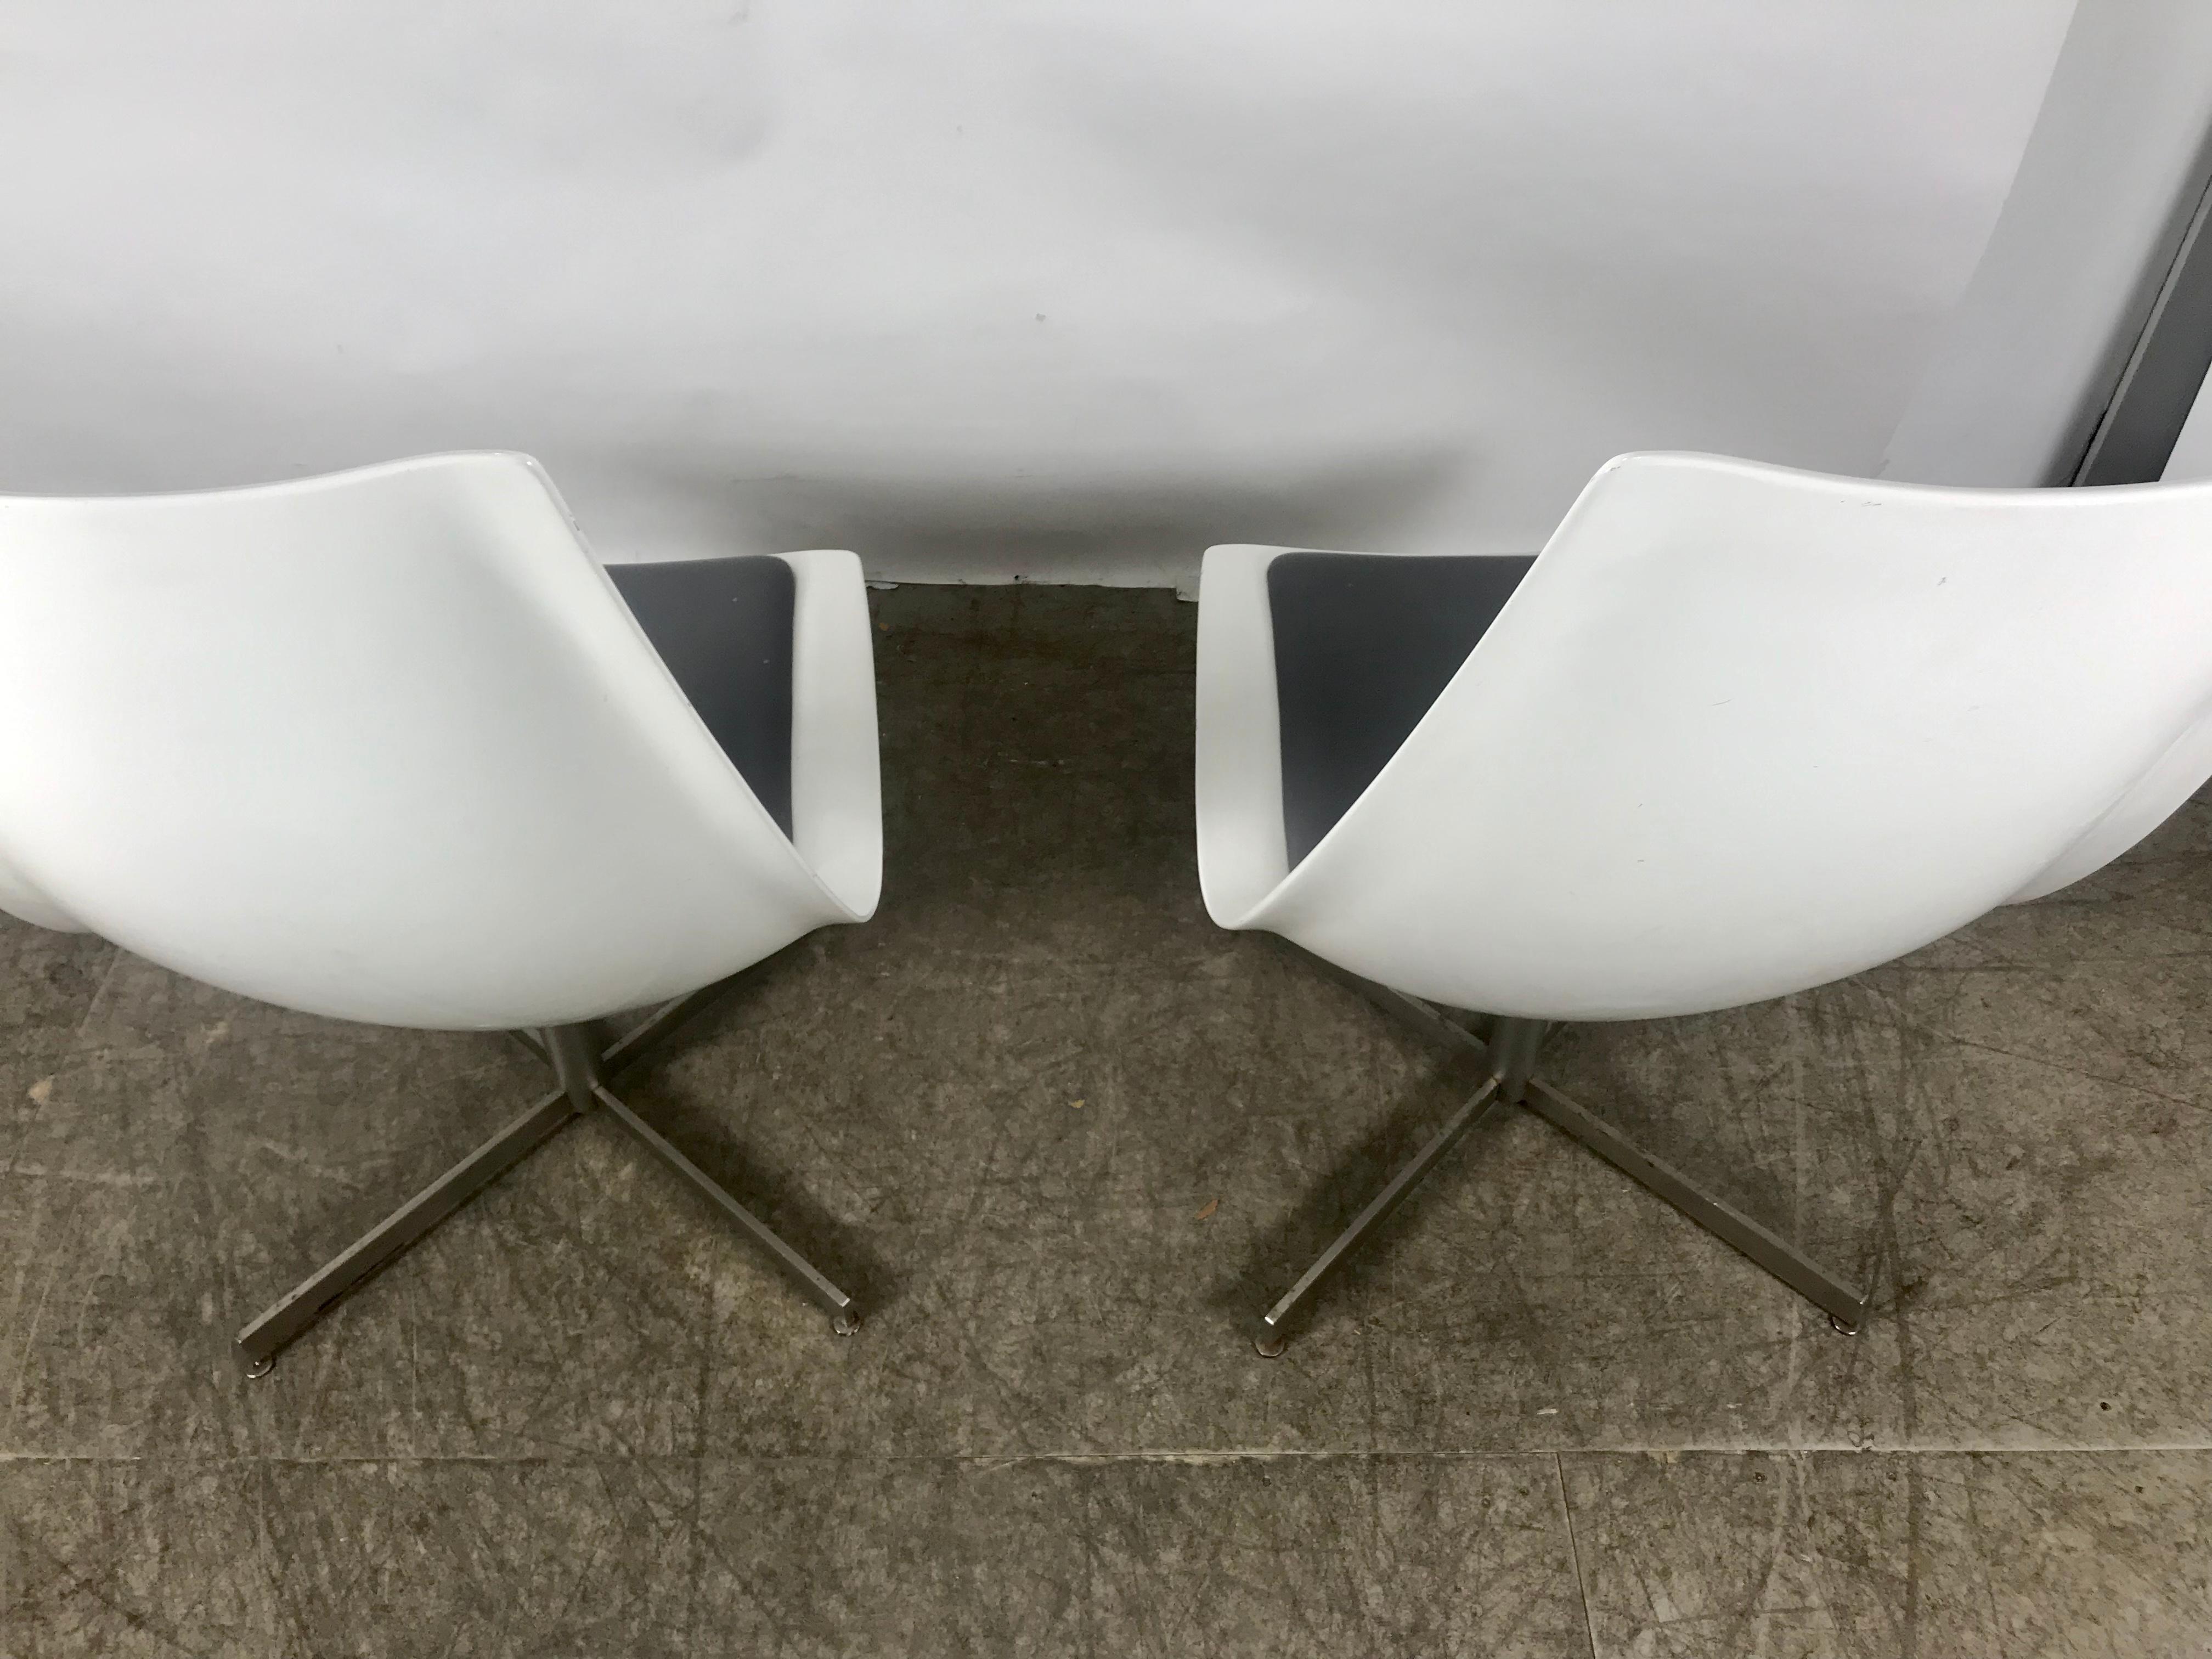 Stainless Steel Pair of Space Age High Back Fiberglass Swivel Chairs, Montreal Expo 67